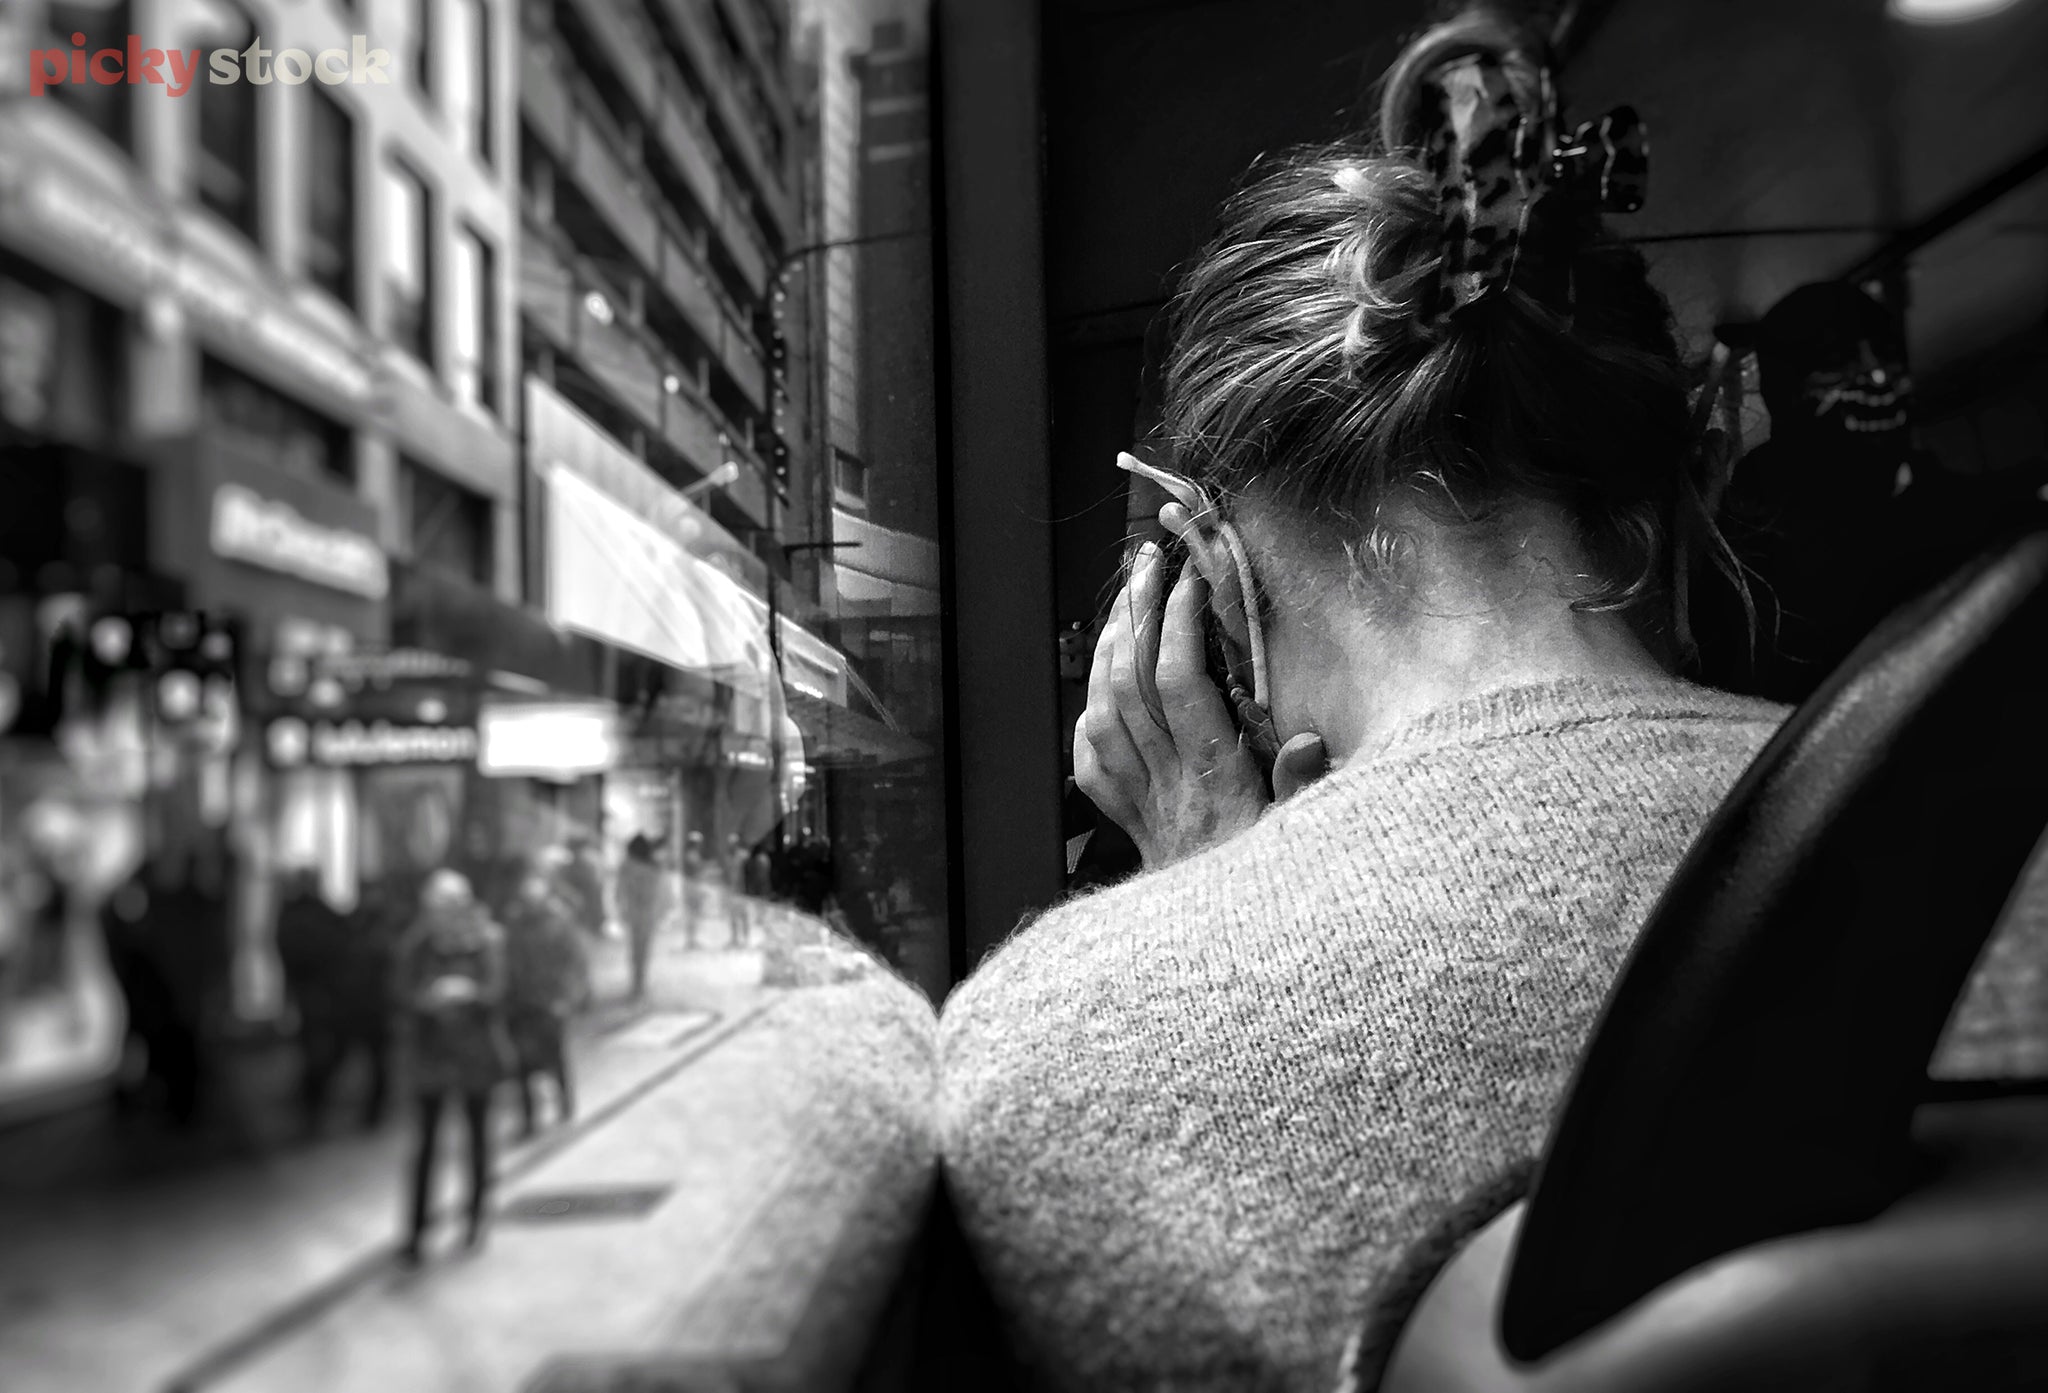 Black and white observational image from the back of a public bus. From over the sea, we see a lady at the window seat, hunched over on phone call, her hair clipped up in a bun. 